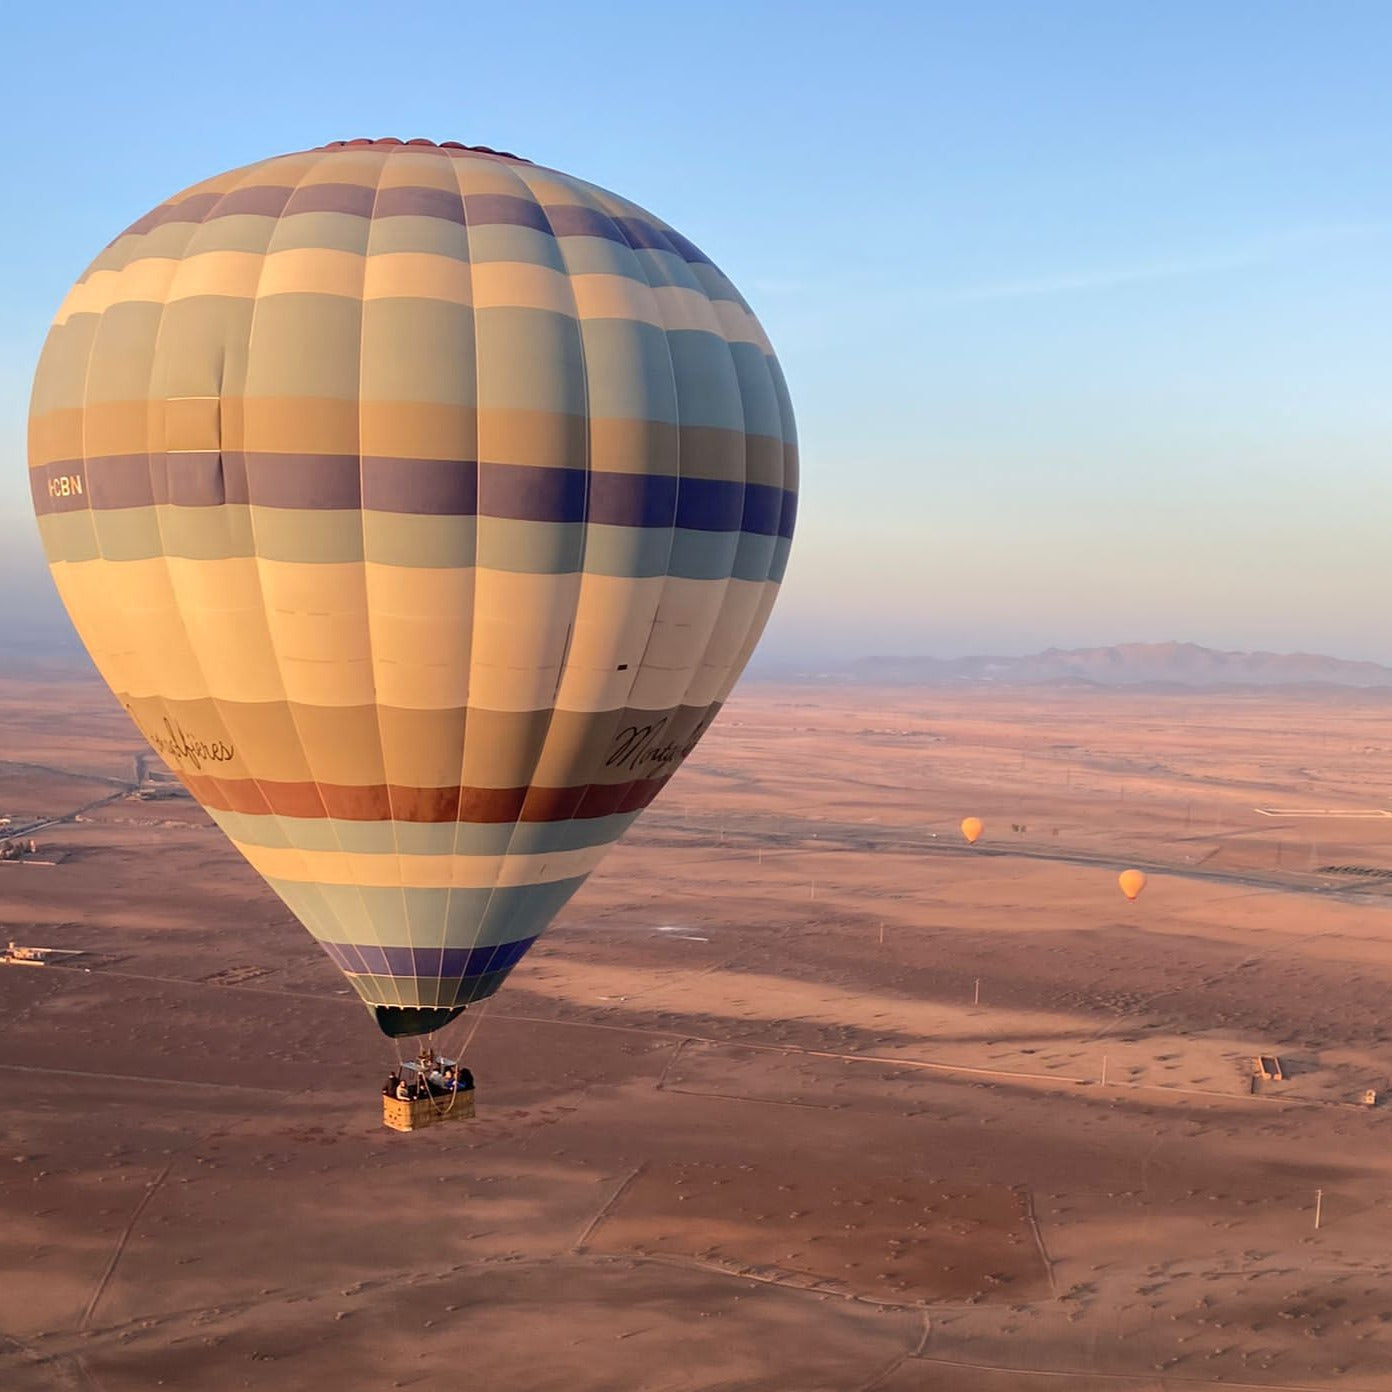 Hot Air Balloon With Breakfast